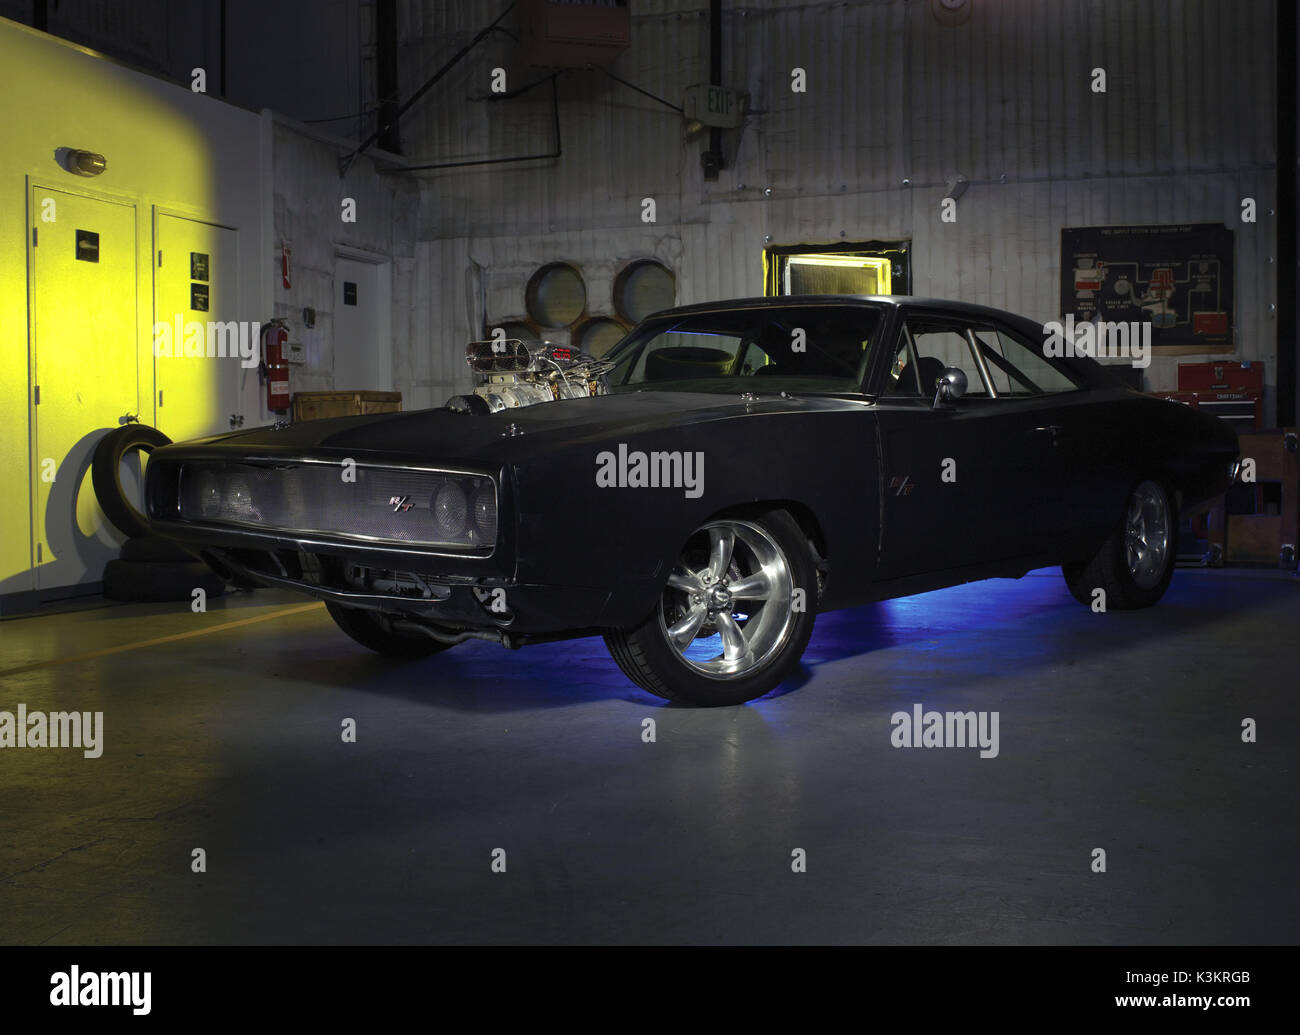 FAST & FURIOUS [US 2009], ovvero FAST & FURIOUS 4 Dom Toretto's 1970 Dodge Charger data: 2009 Foto Stock